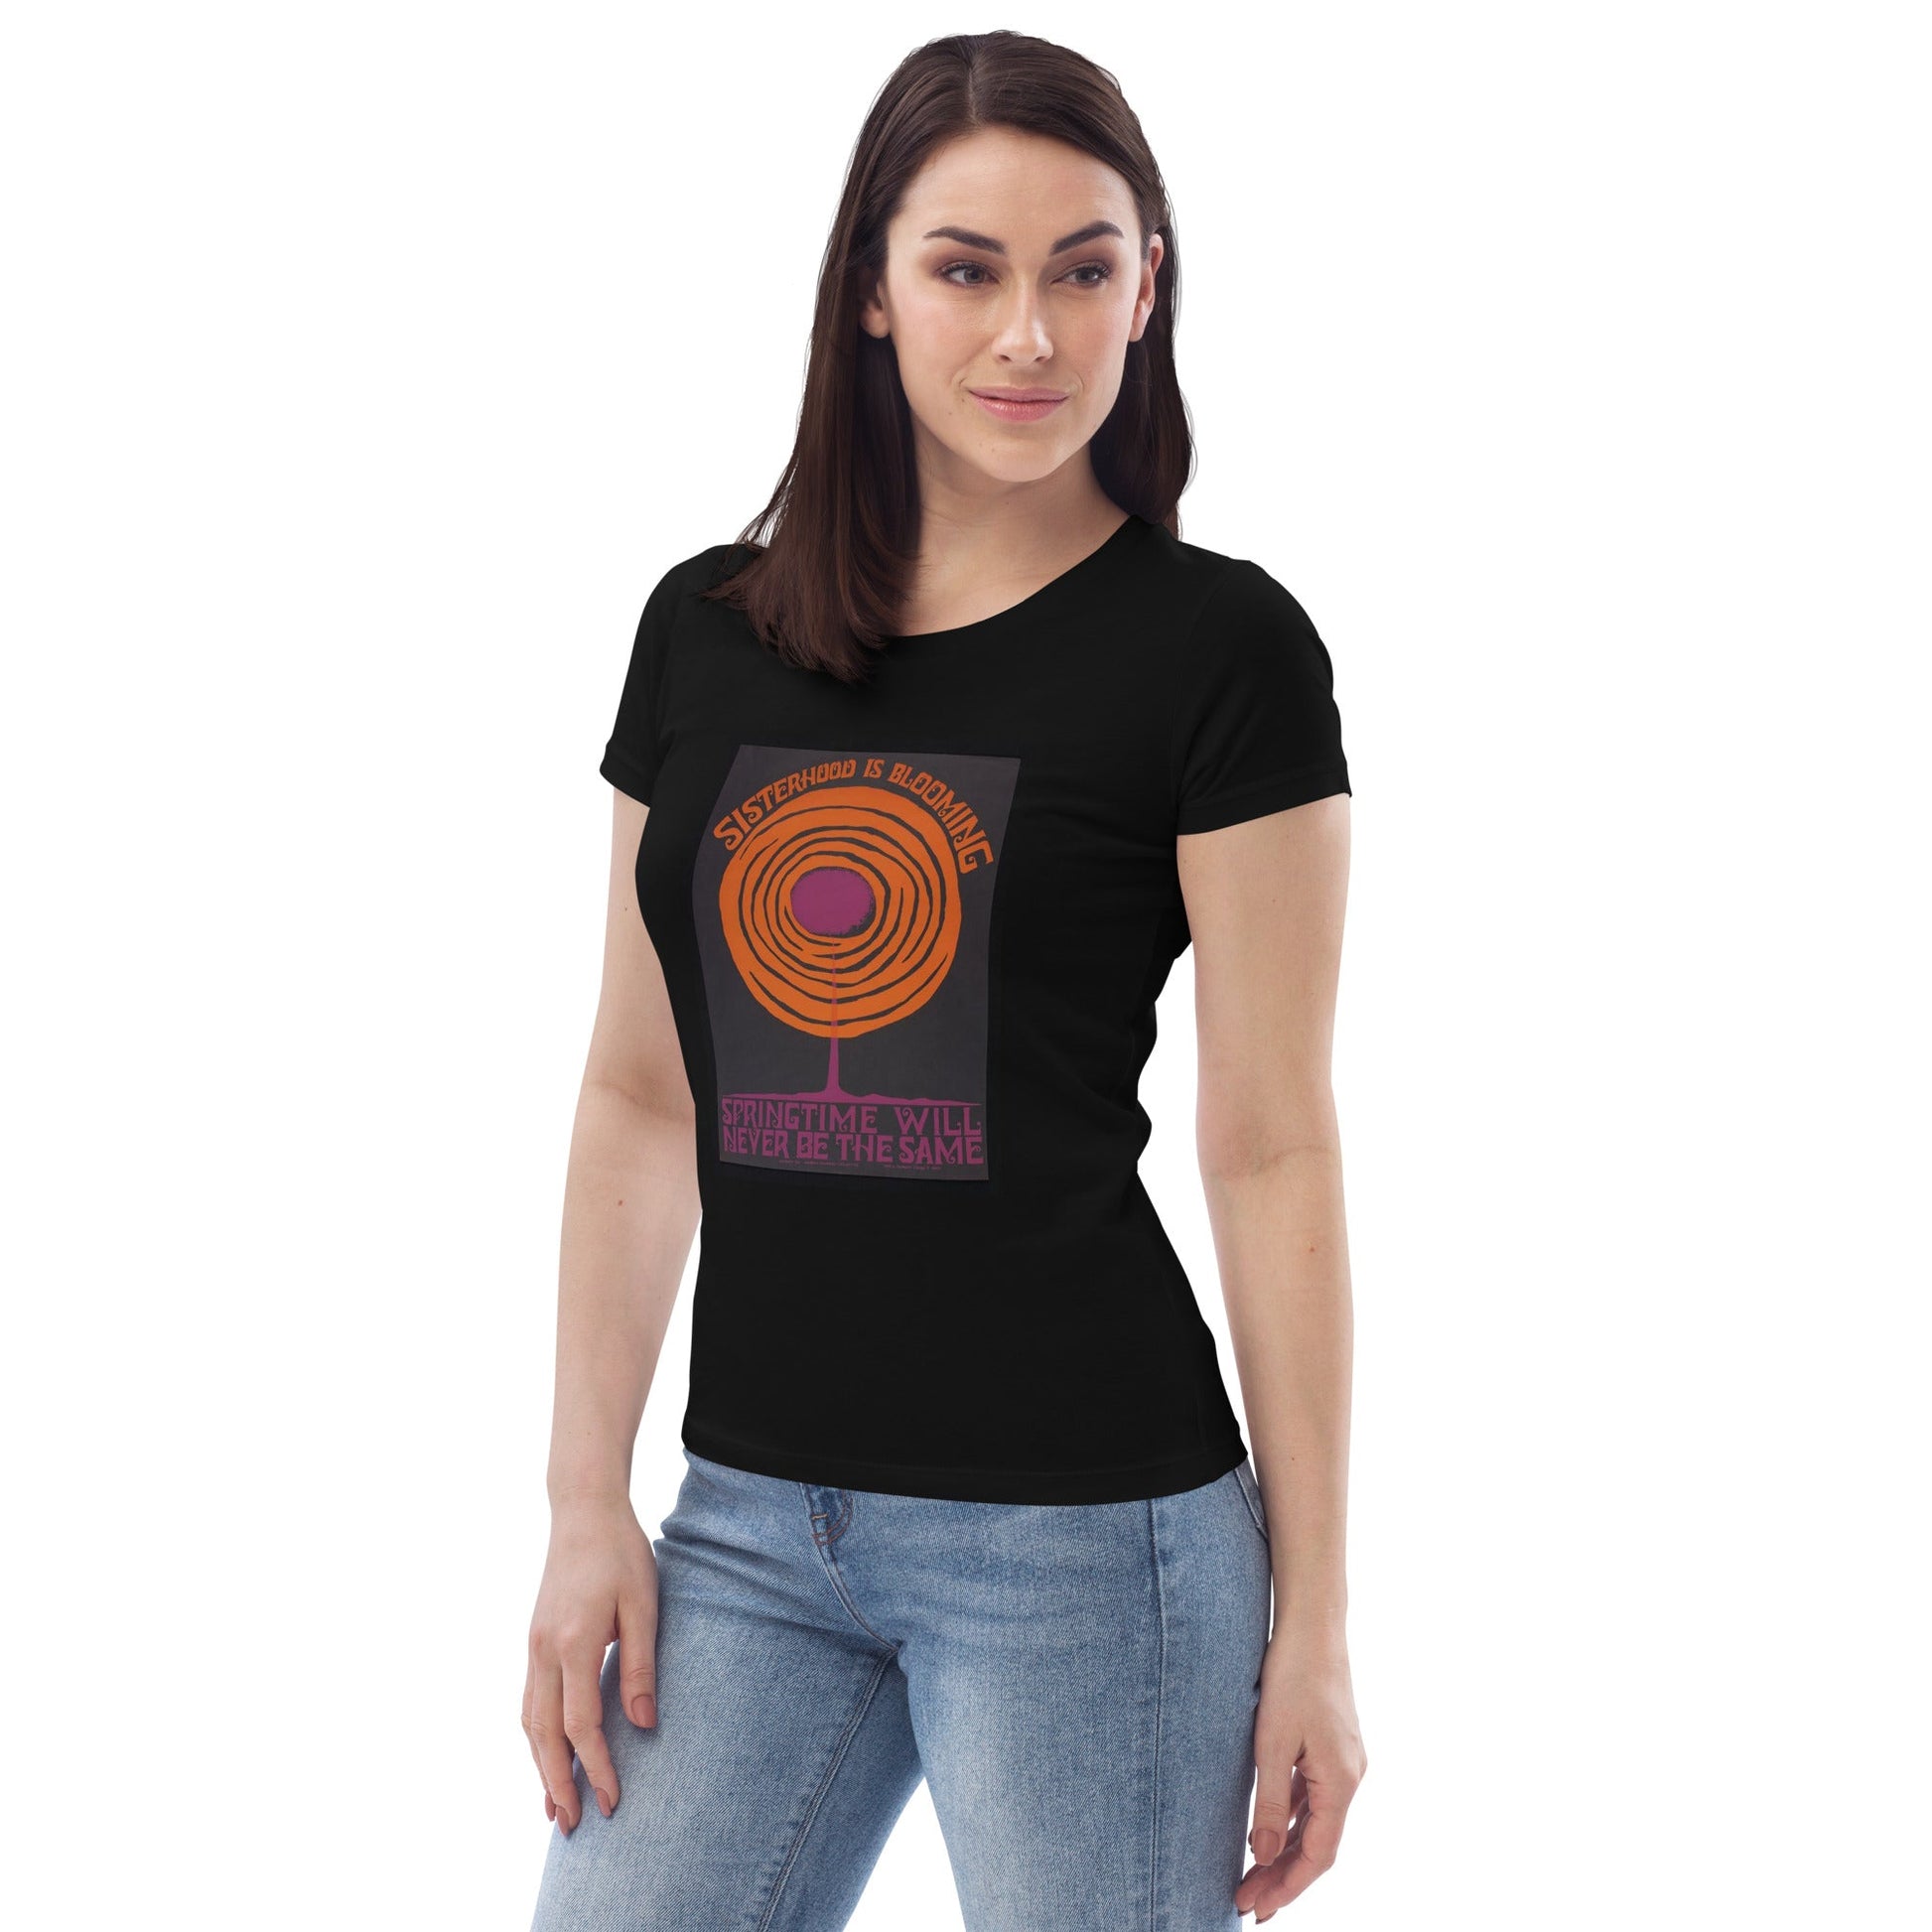 Sisterhood - Women's fitted eco tee - Souled Out World